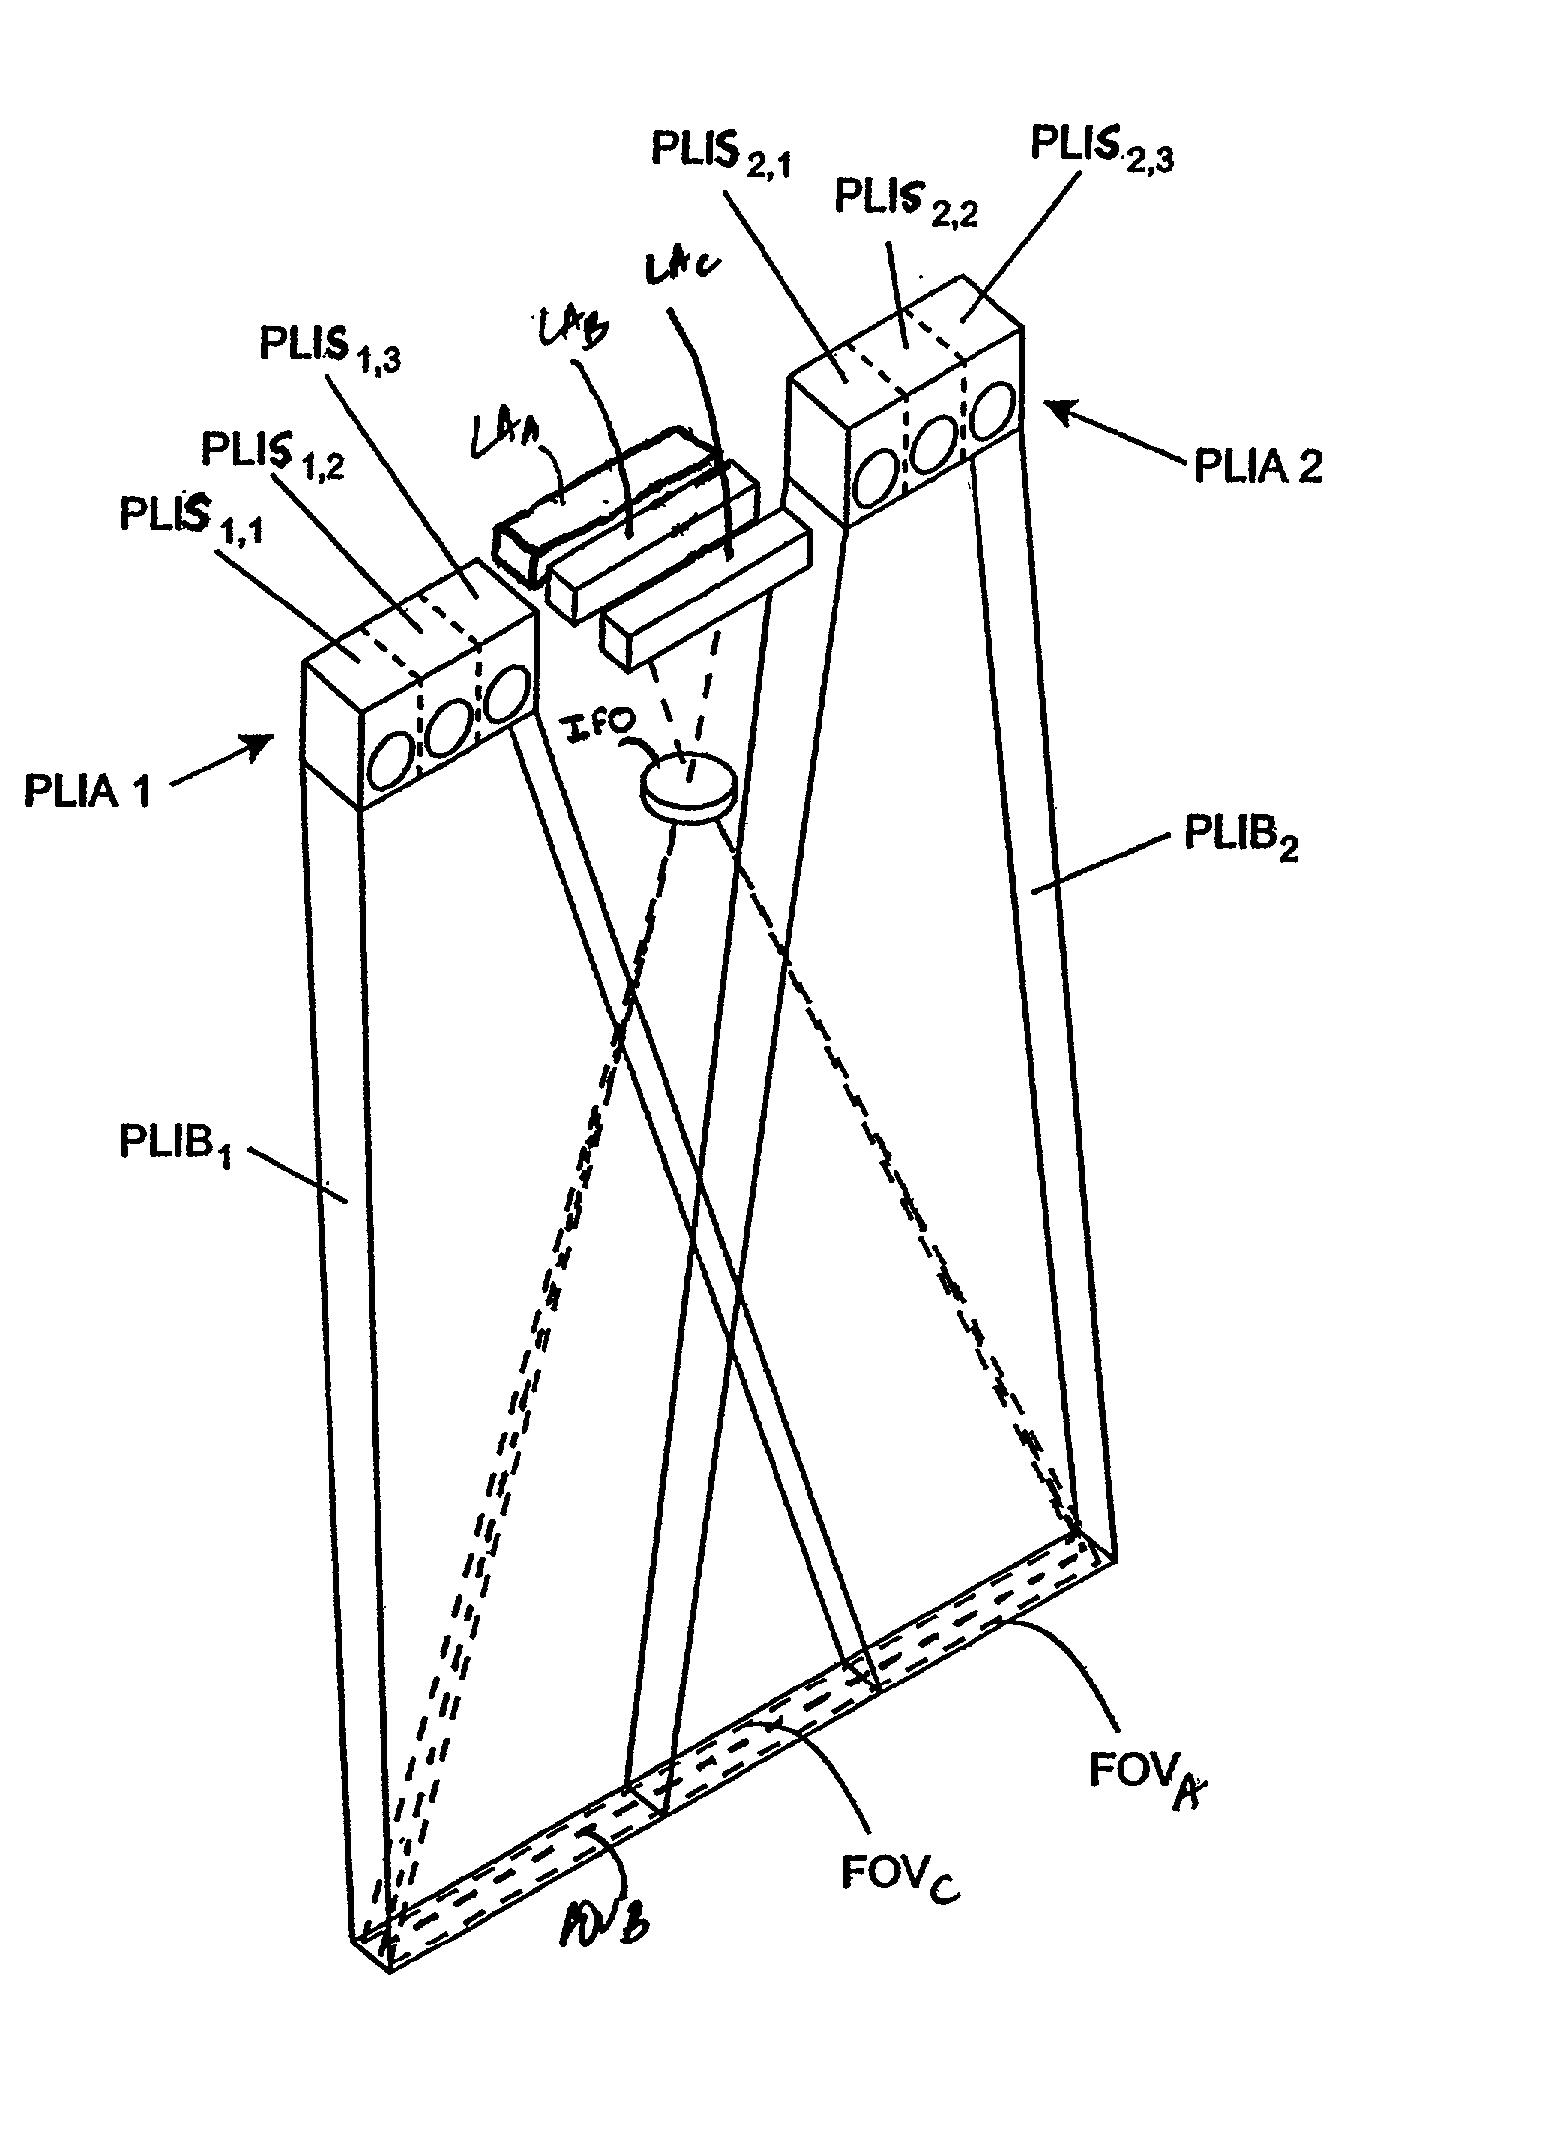 Planar light illumination and imaging device with modulated coherent illumination that reduces speckle noise induced by coherent illumination